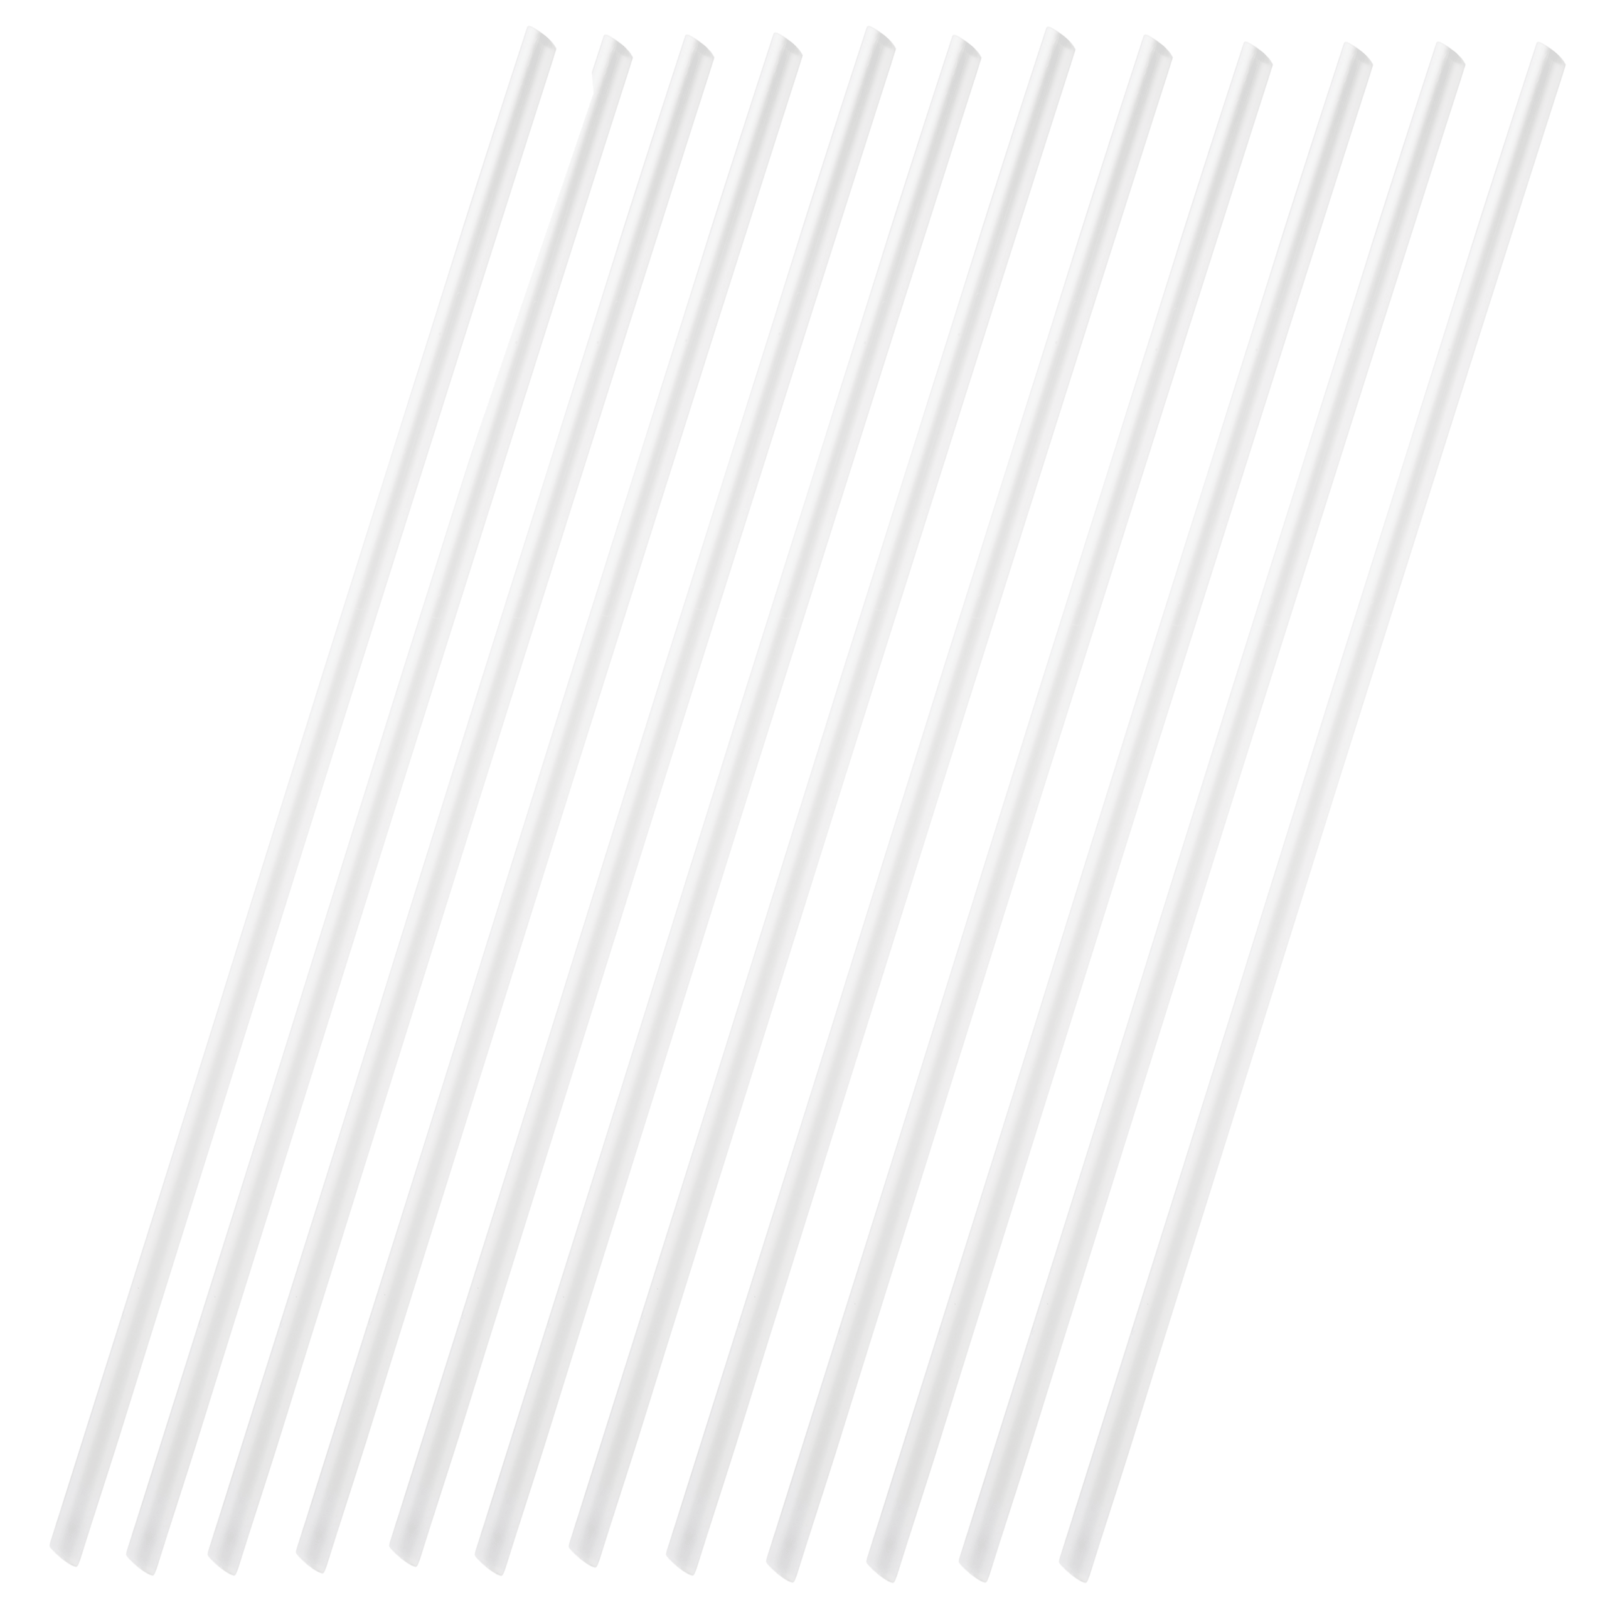 Flexible Reusable Drinking Straw - 18 Inches Long